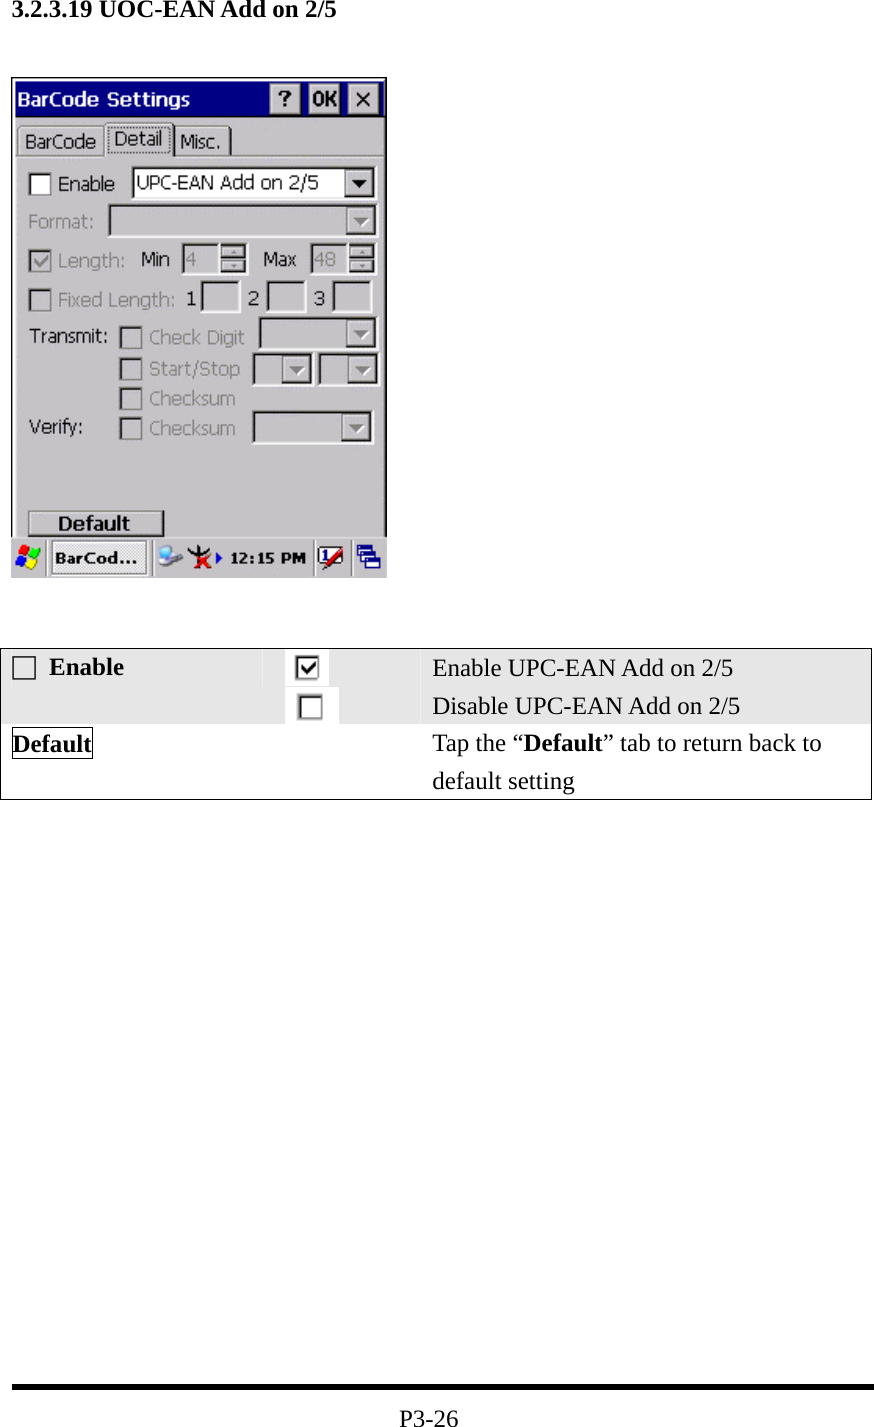 3.2.3.19 UOC-EAN Add on 2/5                    P3-26 □ Enable   Enable UPC-EAN Add on 2/5 Disable UPC-EAN Add on 2/5 Default   Tap the “Default” tab to return back to default setting 